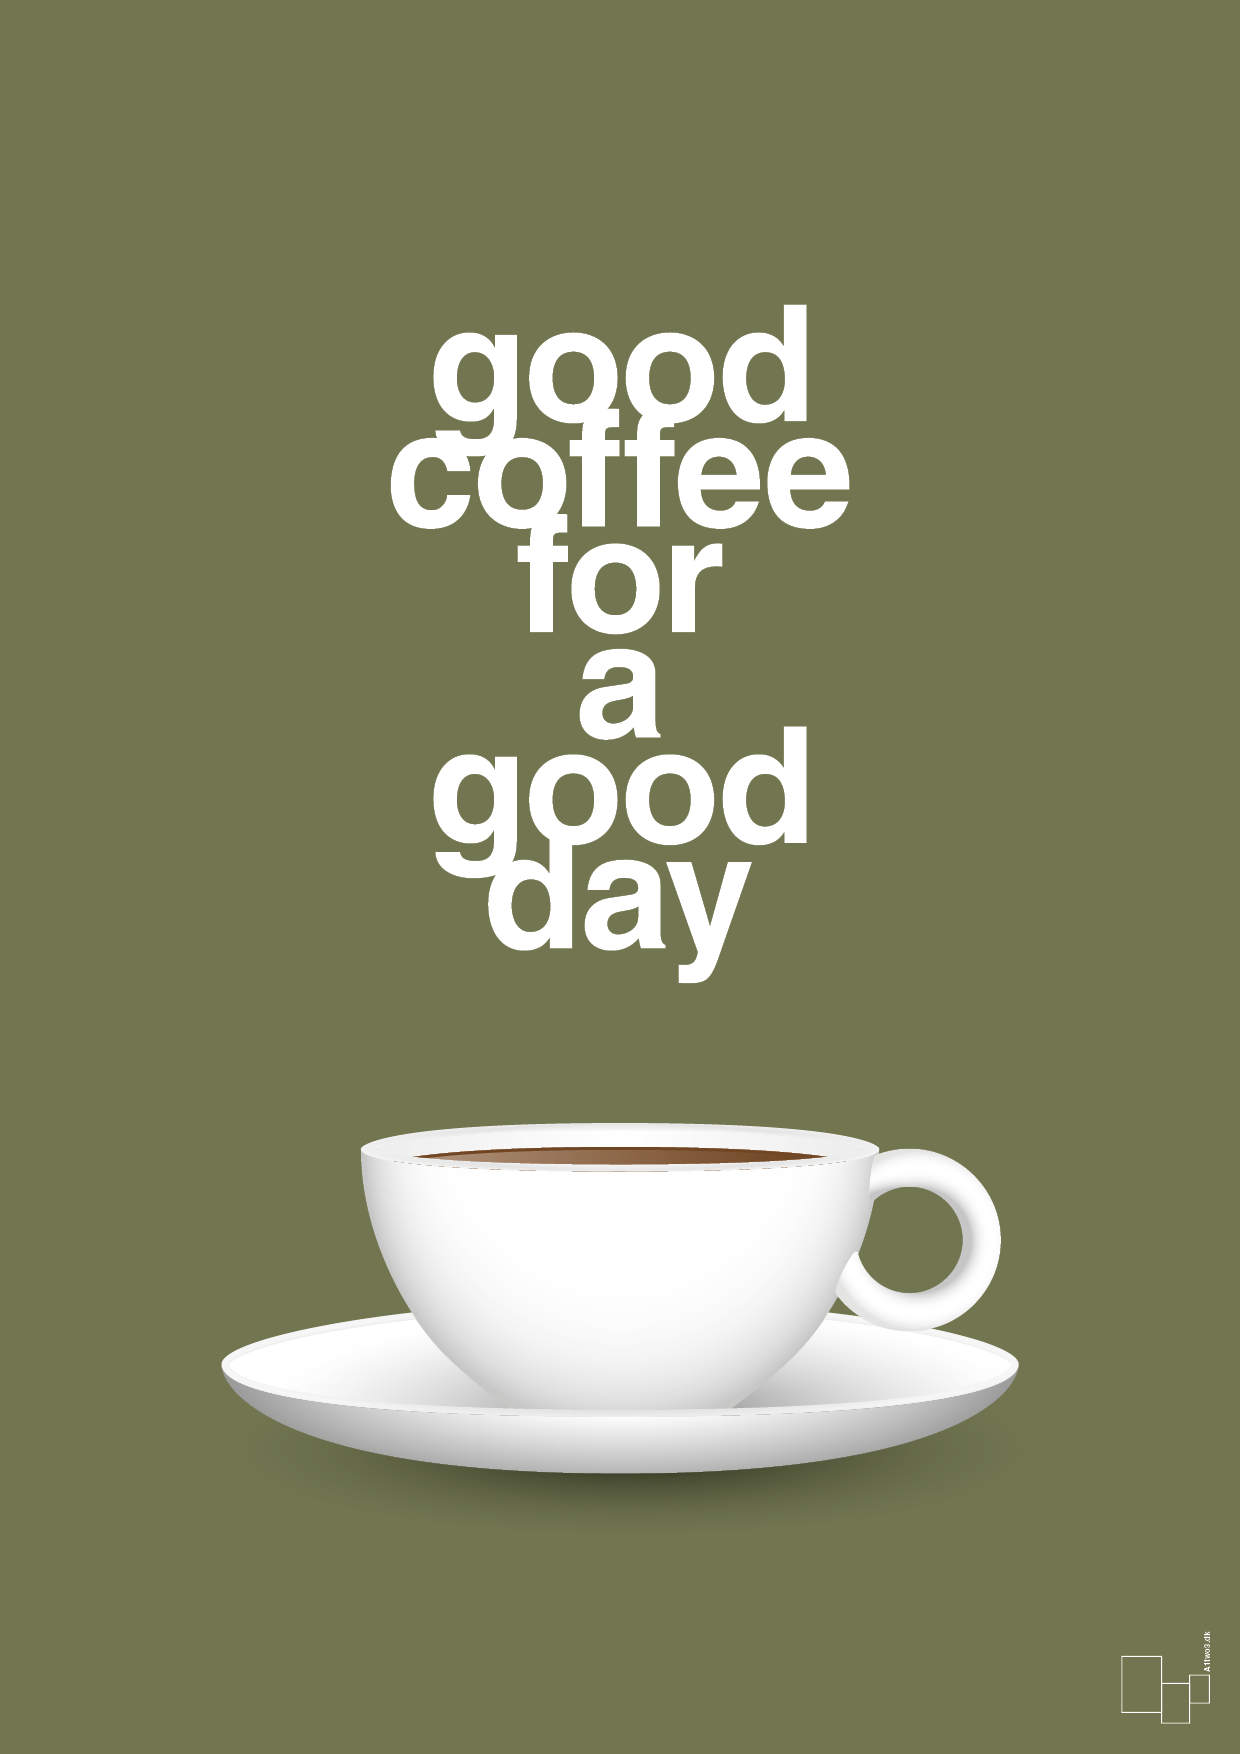 good coffee for a good day - Plakat med Mad & Drikke i Secret Meadow